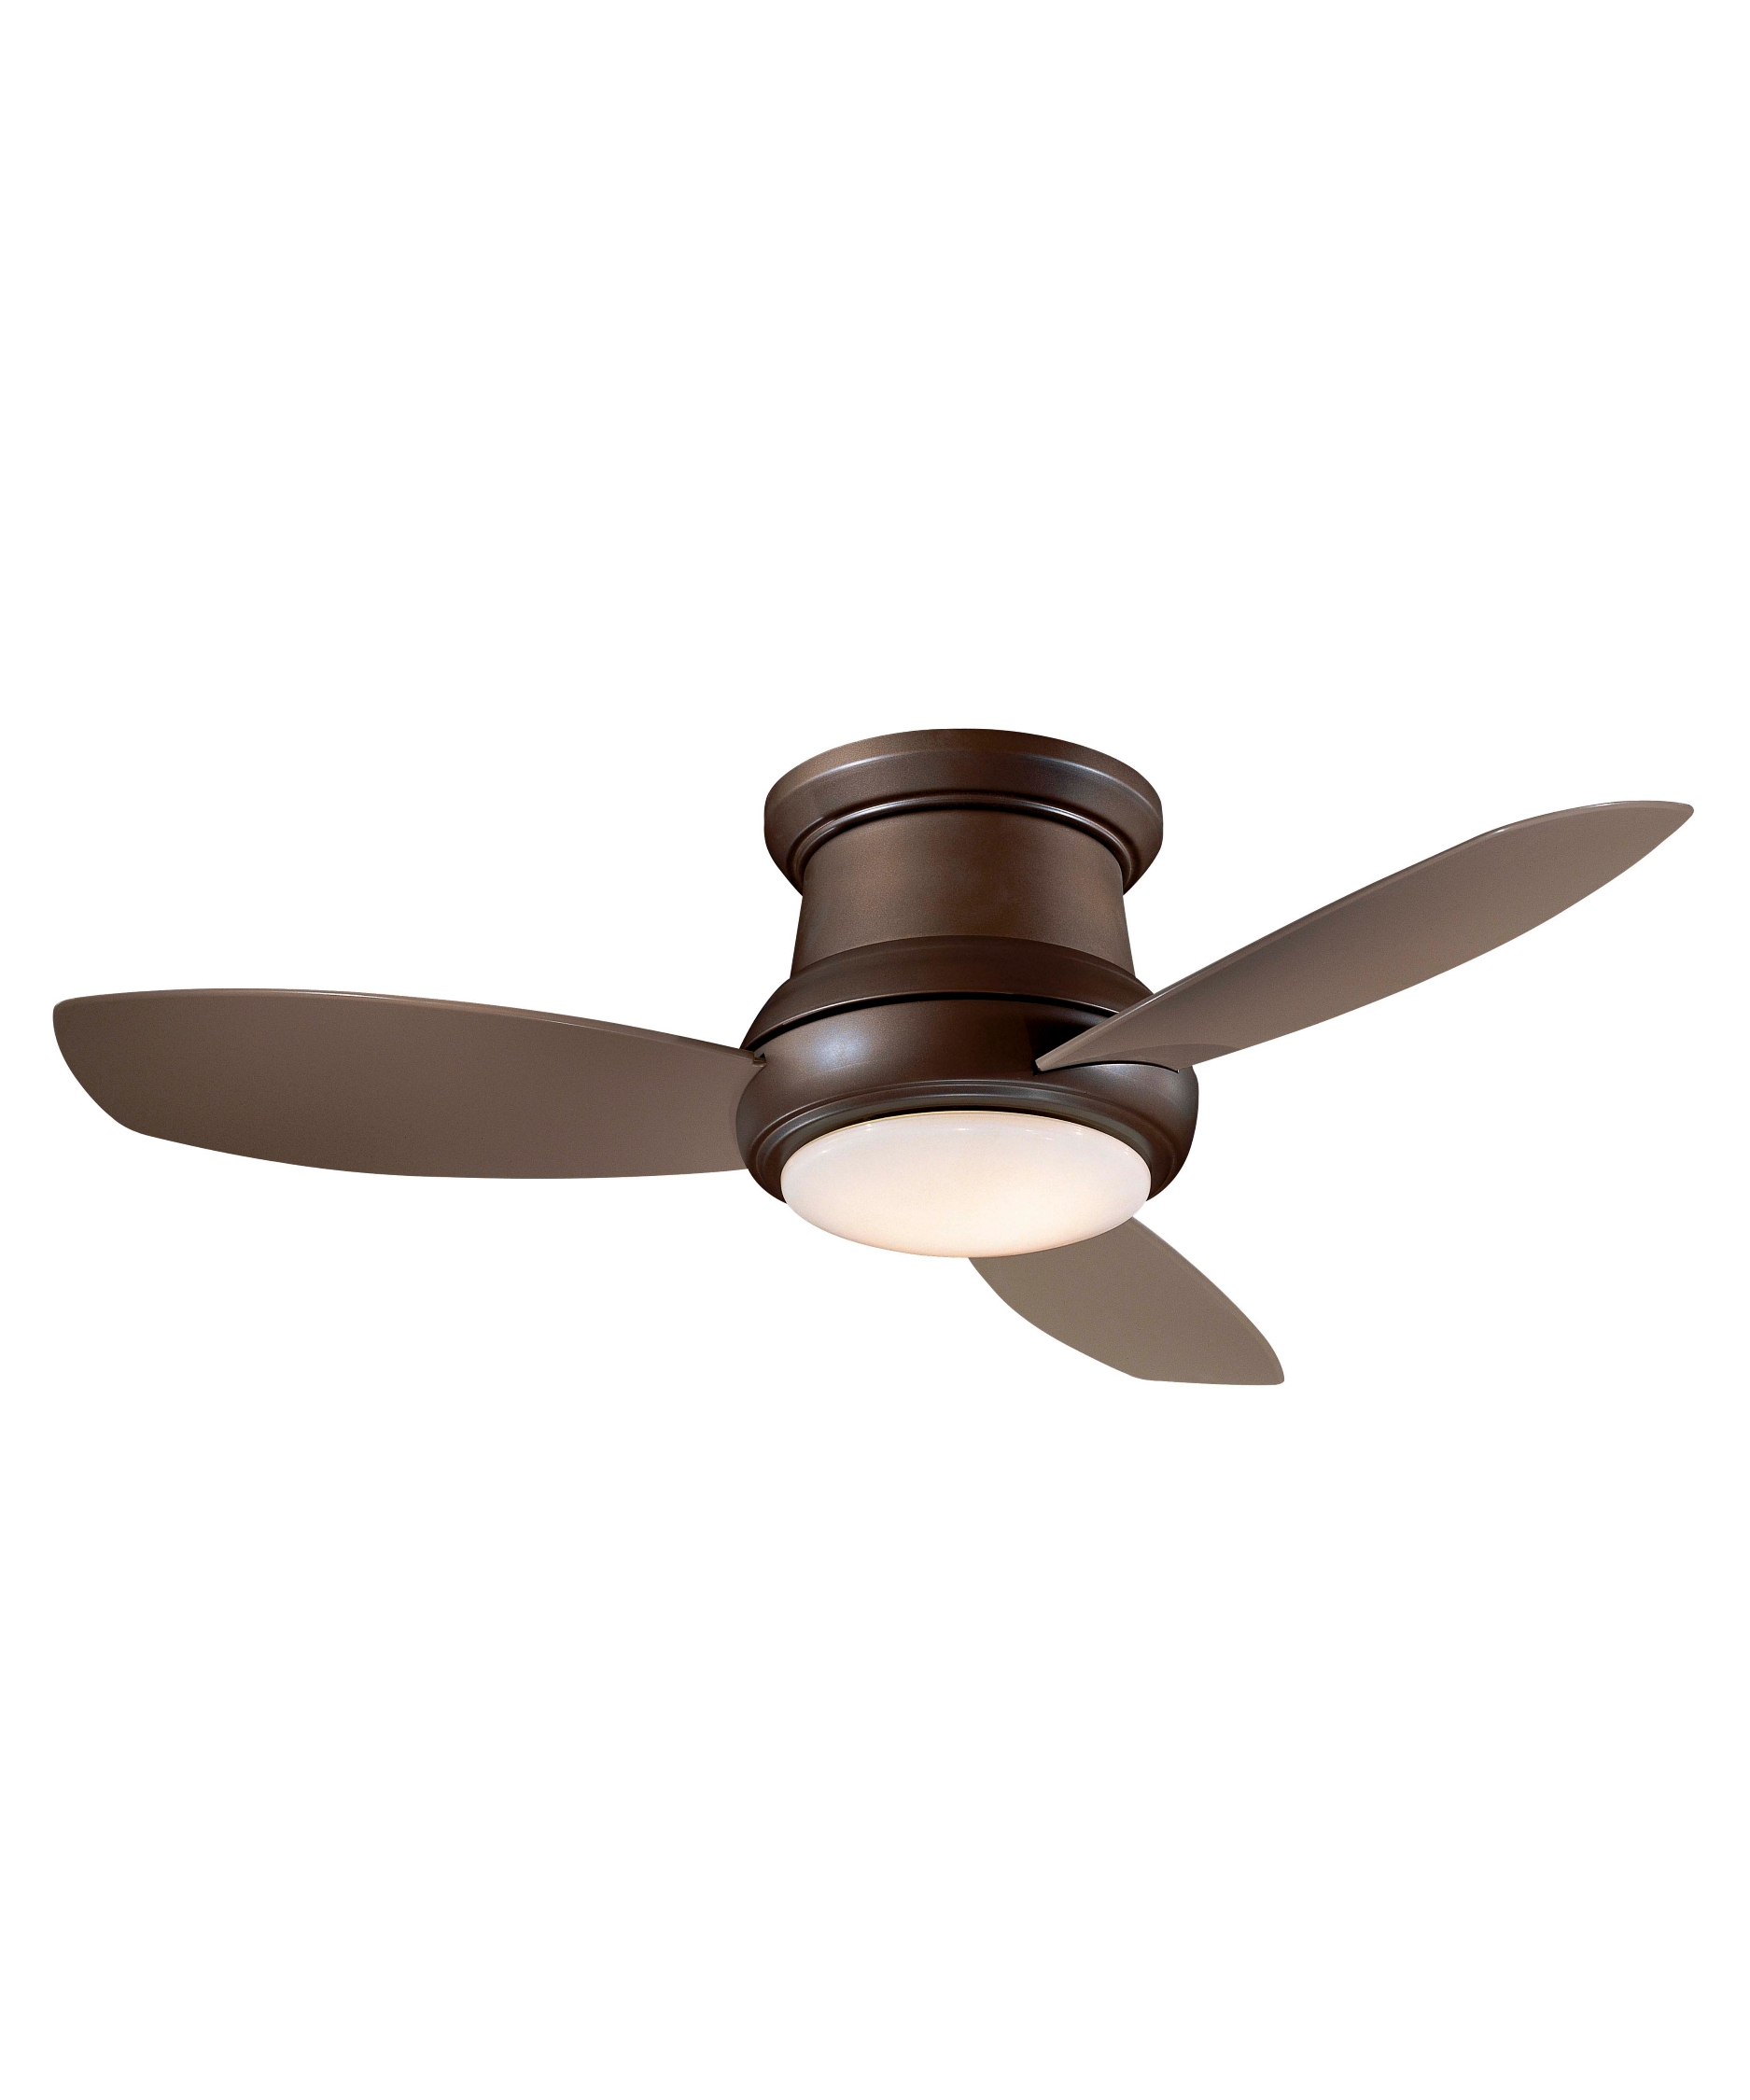 Oil Rubbed Bronze Ceiling Fan With Light Flush Mount1875 X 2250